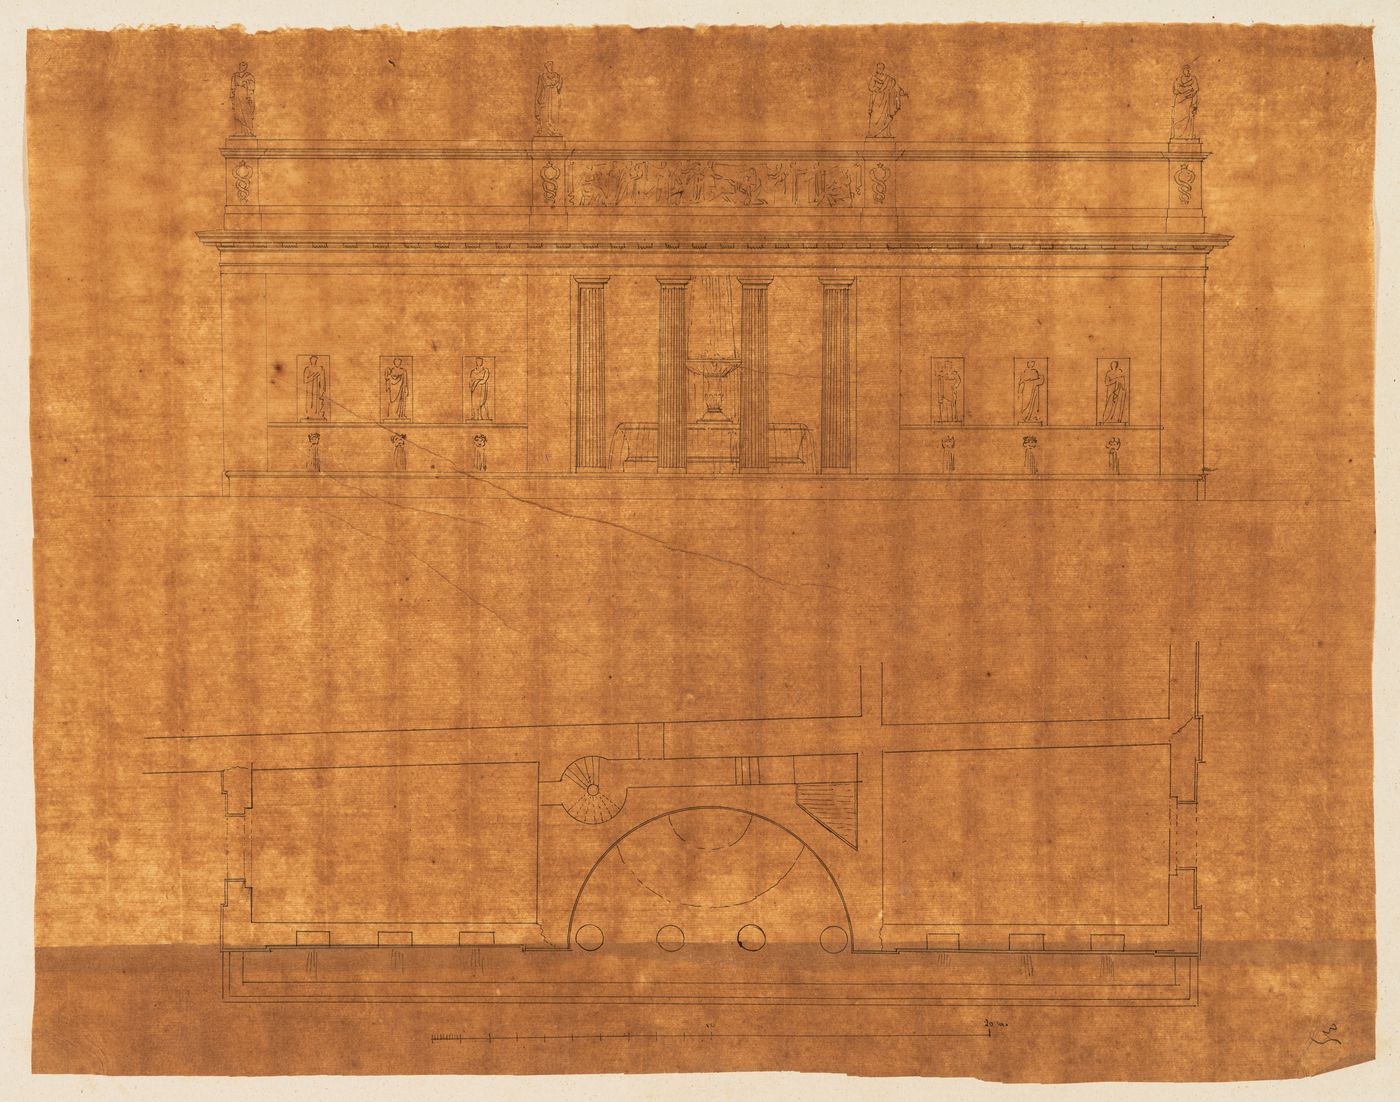 Project for the redevelopment of the École de médecine and surrounding area, Paris: Elevation and plan for a variant design for a fountain for the Clinique de l'École de médecine